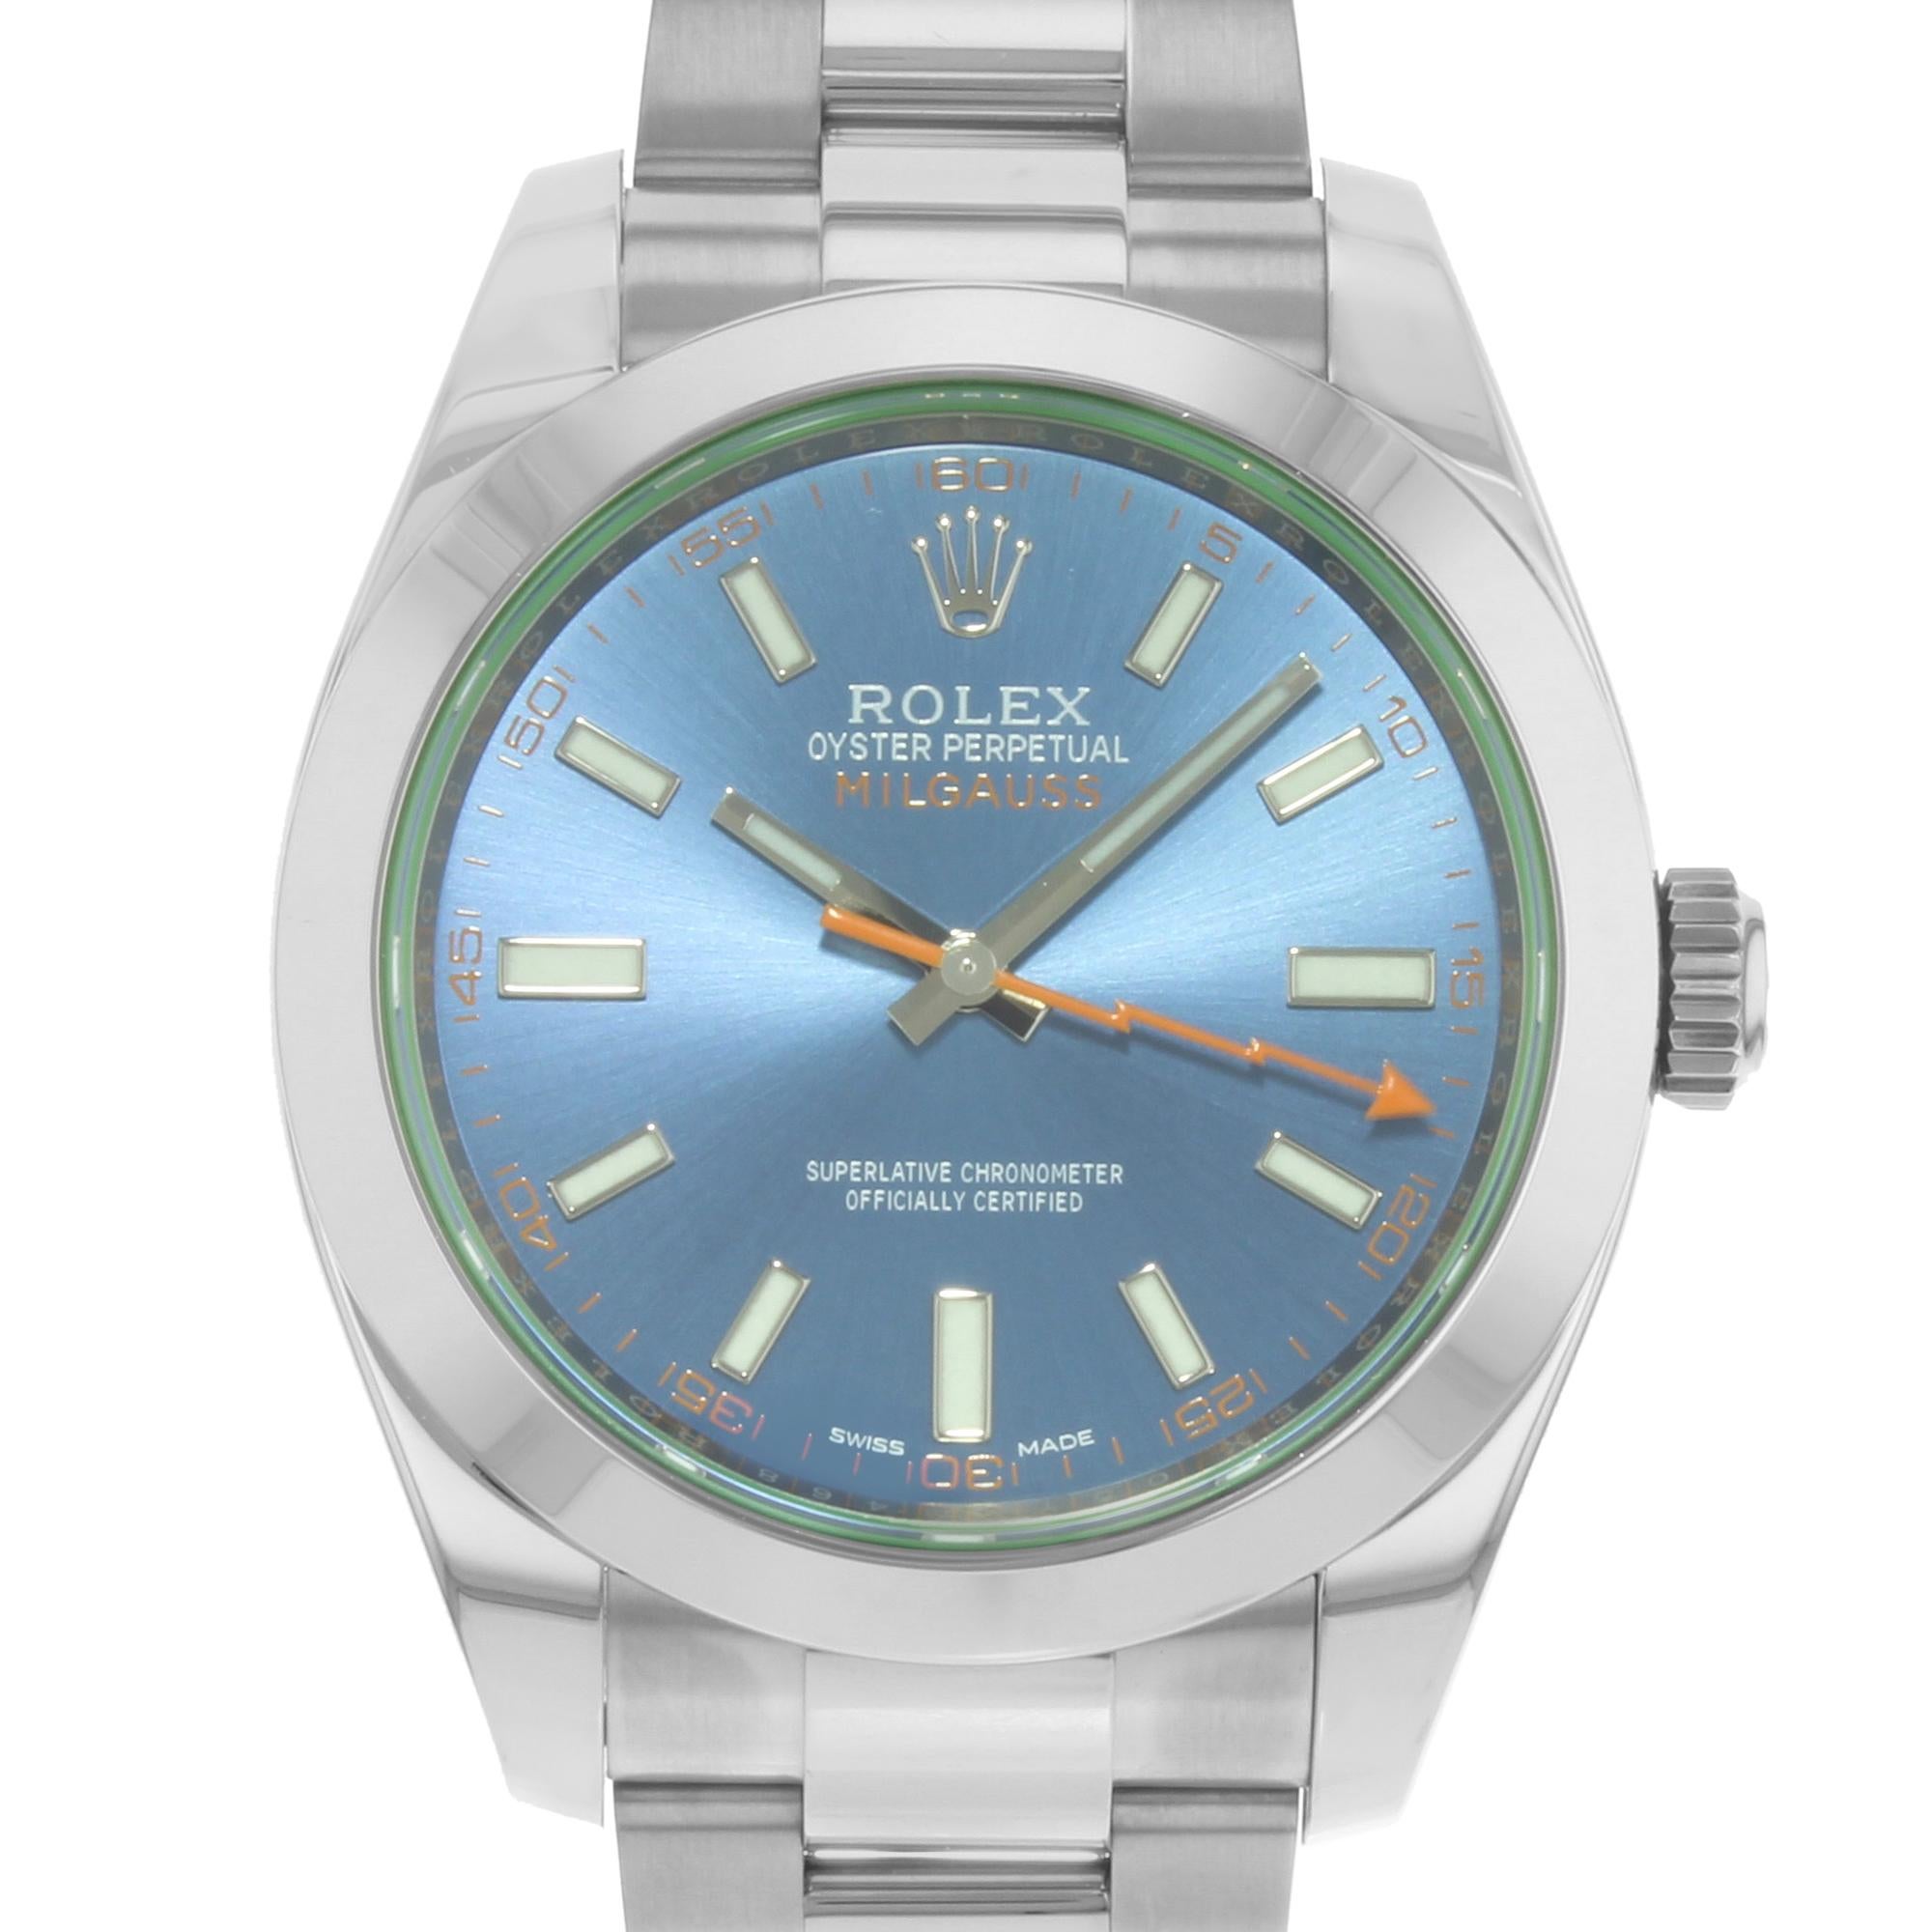 Display model. Excellent condition. 2021 card.

Brand: Rolex  Type: Wristwatch  Department: Men  Model Number: 116400GV  Country/Region of Manufacture: Switzerland  Style: Luxury  Model: Rolex Milgauss 116400GV  Vintage: No  Movement: Mechanical